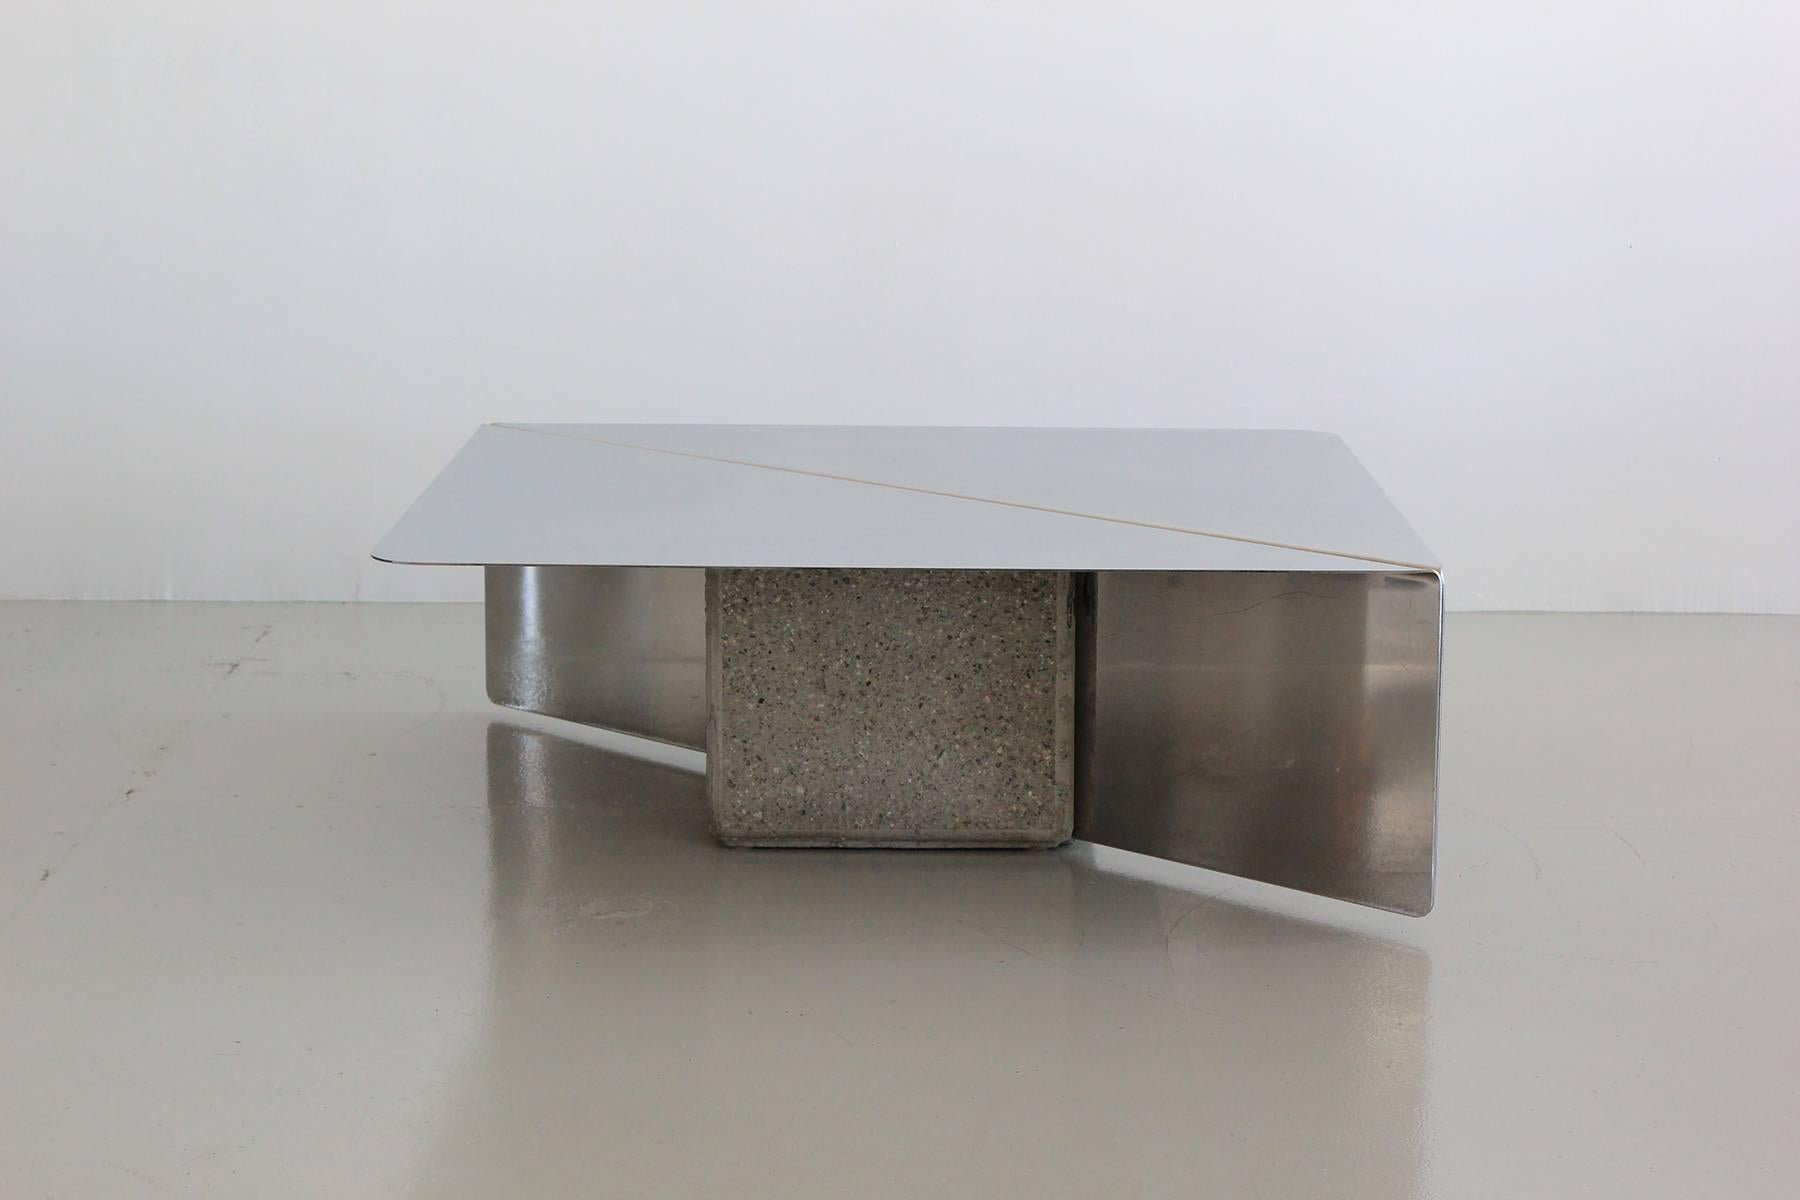 Rare coffee table by Giovanni Offredi for Saporiti comprised of two heavy gauge mirrored stainless steel planes, supported by two cast concrete/stone blocks.
Sculptural and sleek Italian design. 

                 